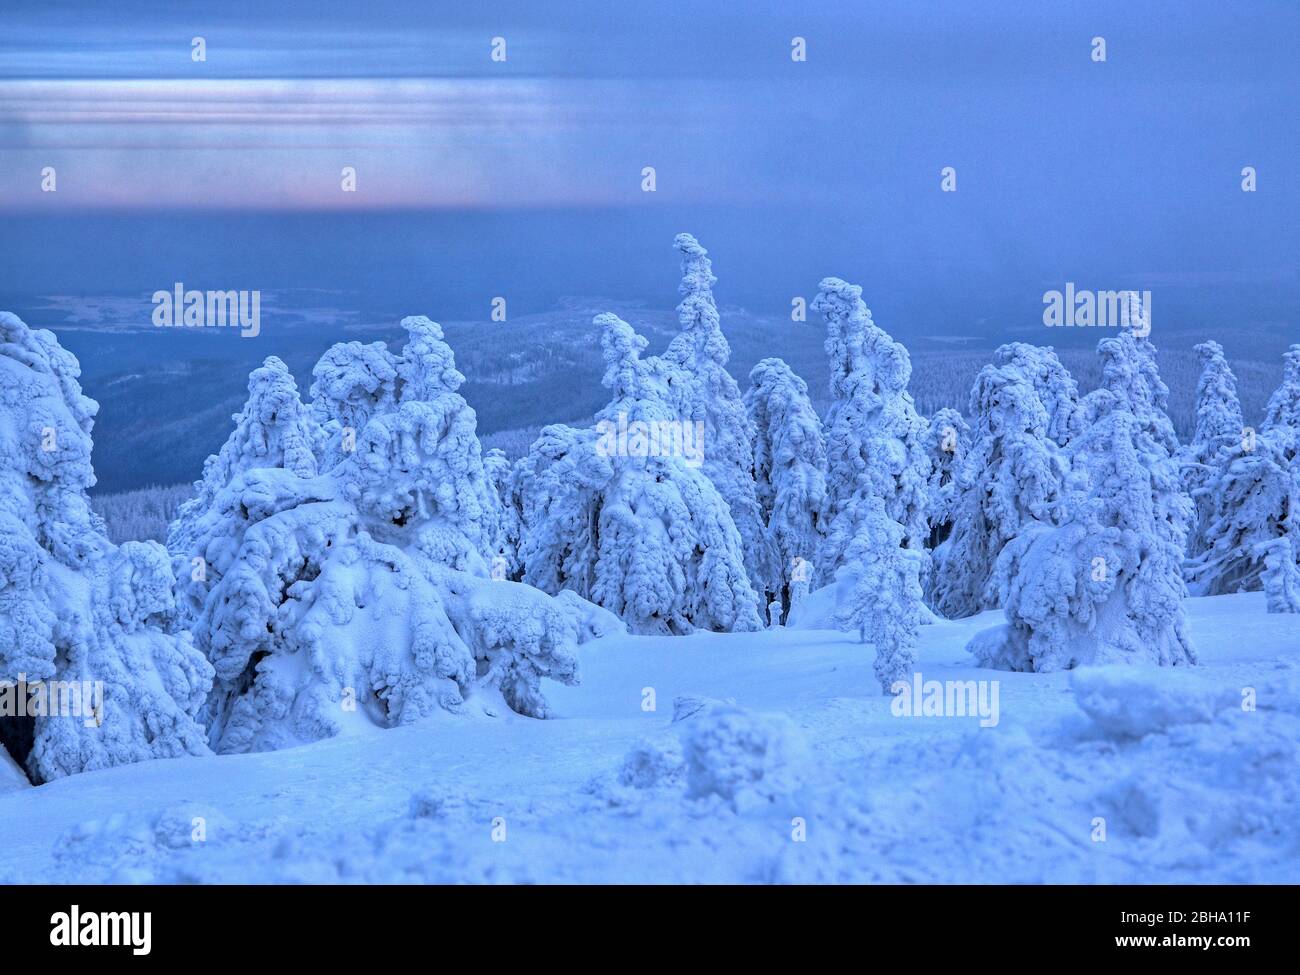 Winter landscape with icy trees at Brocken, Wernigerode, Harz Nature Park, Saxony-Anhalt, Germany Stock Photo